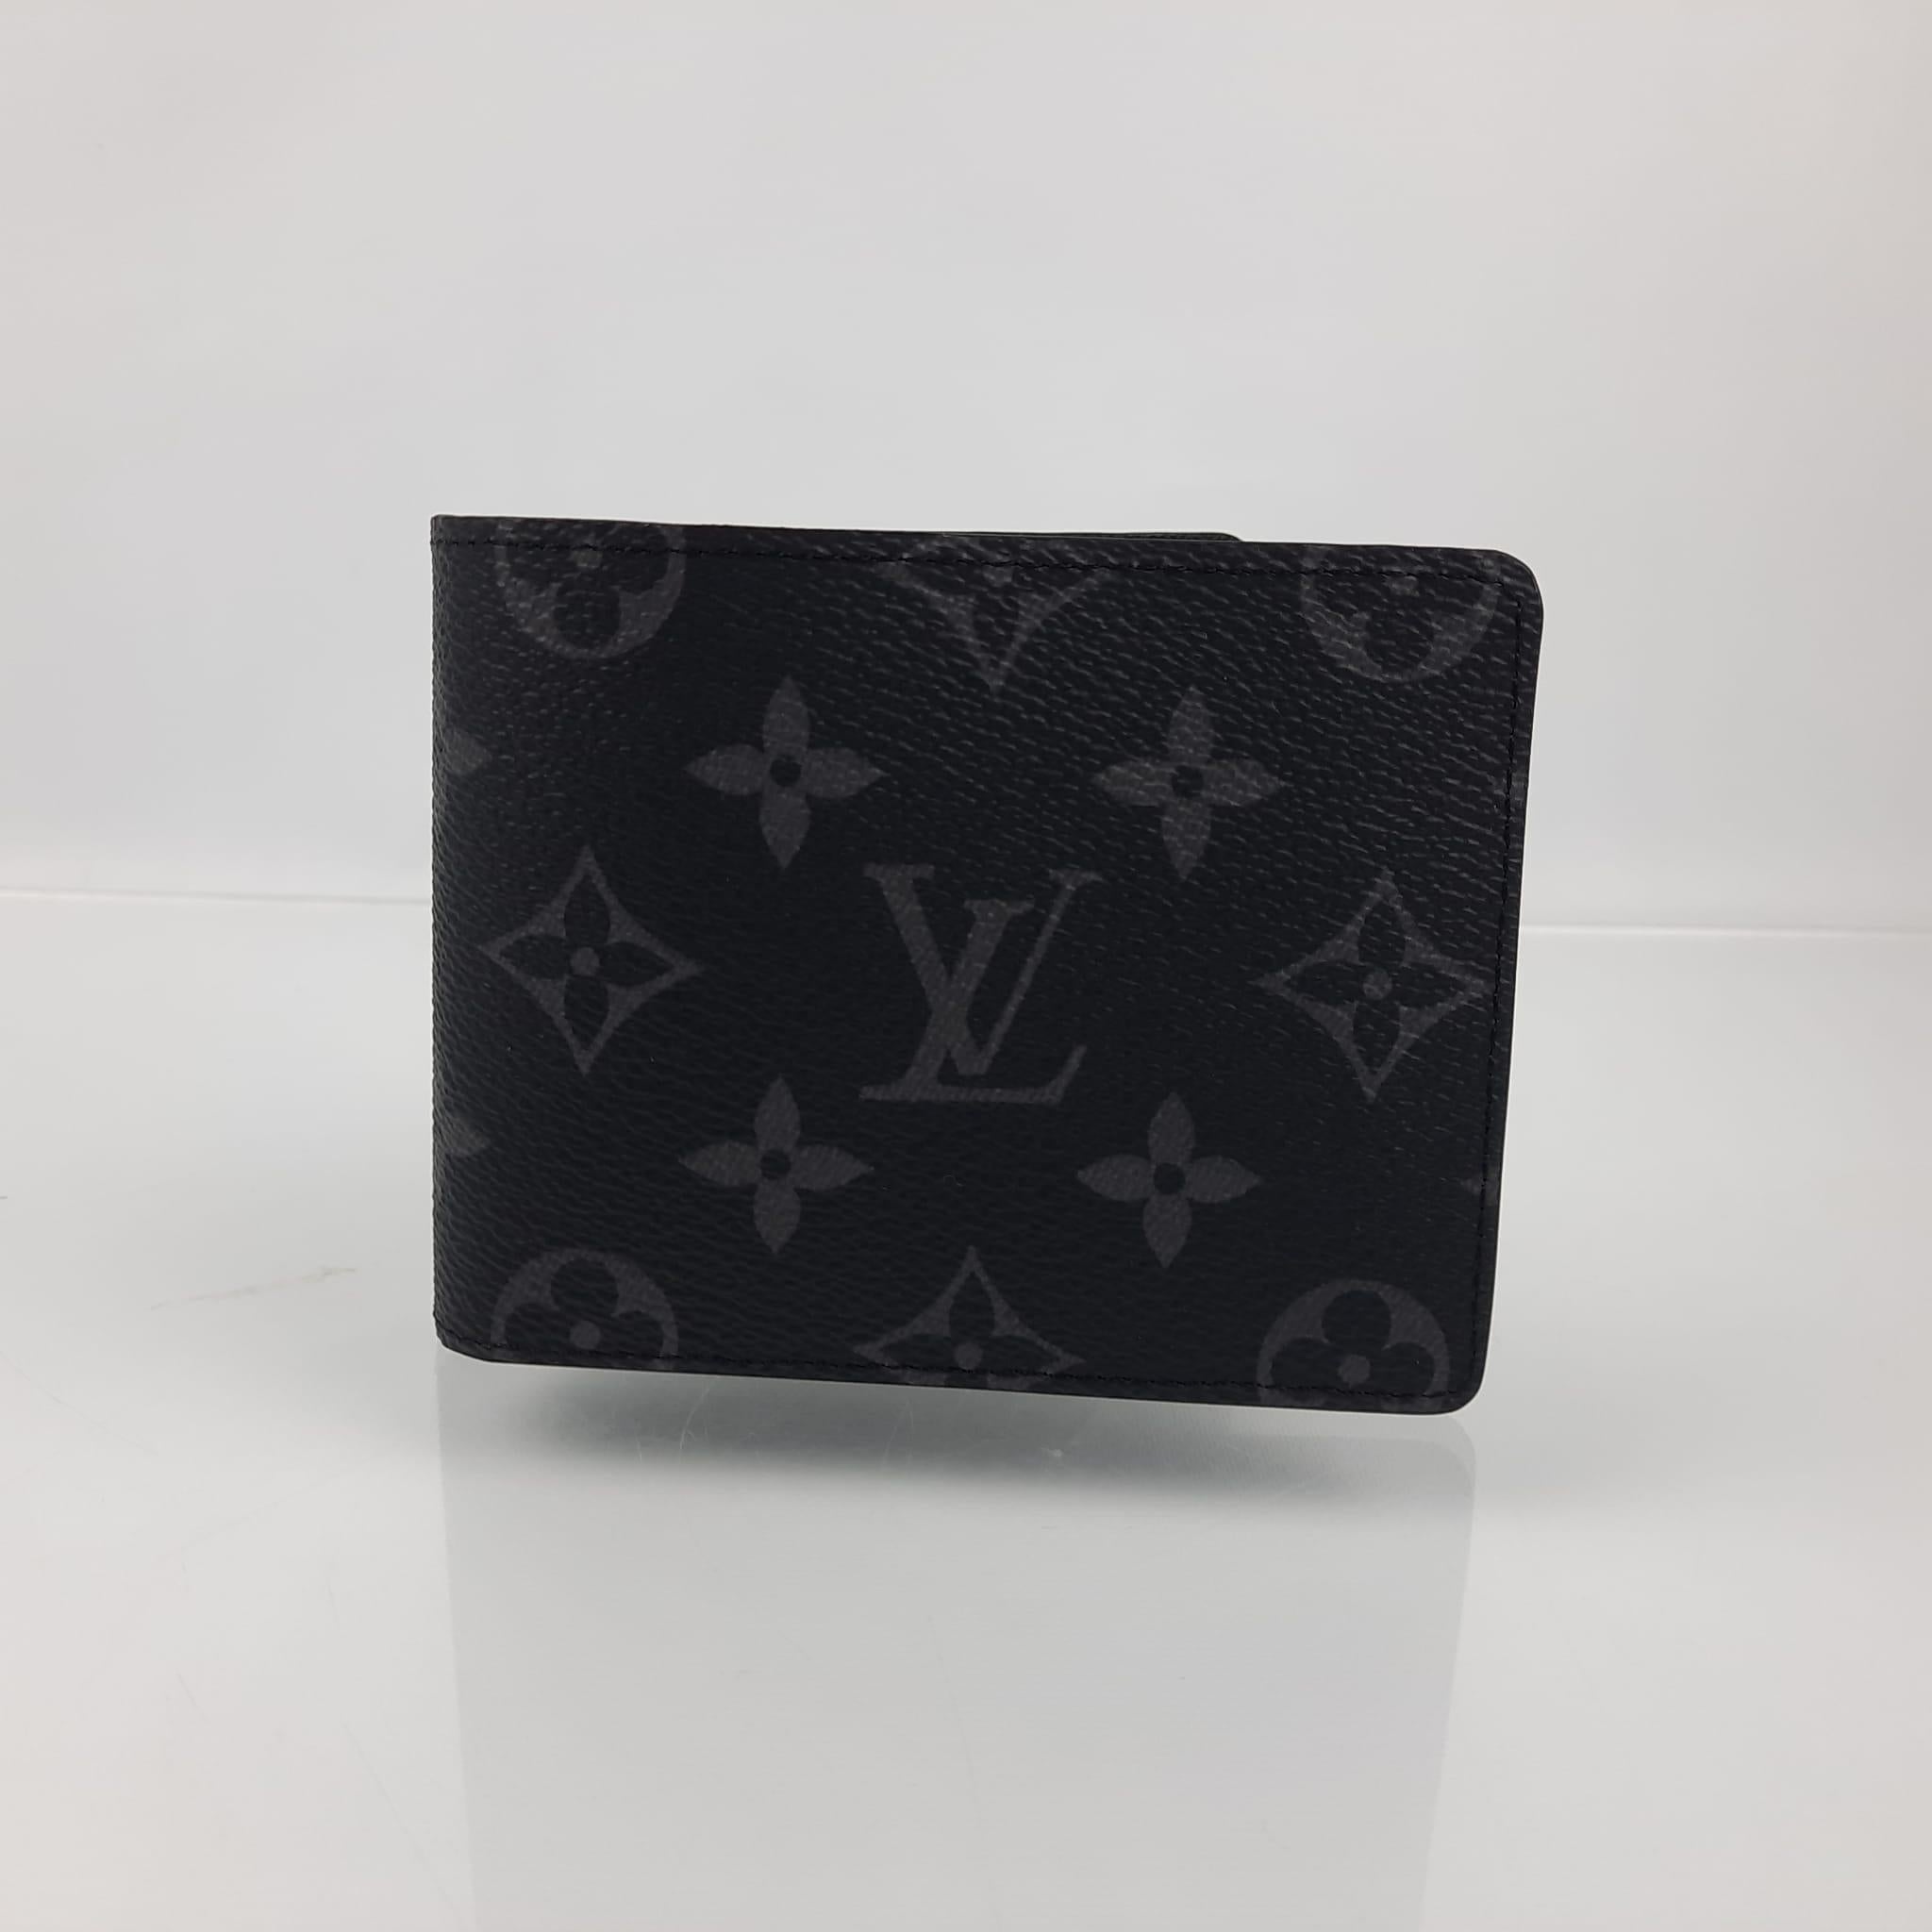 Slender by name, slender by nature. This wallet in masculine Monogram Eclipse canvas is suitably compact and slim, will carry all the essentials and still fit into a front or back pocket with ease.
Coated Canvas
8 credit cards slots
1 bill